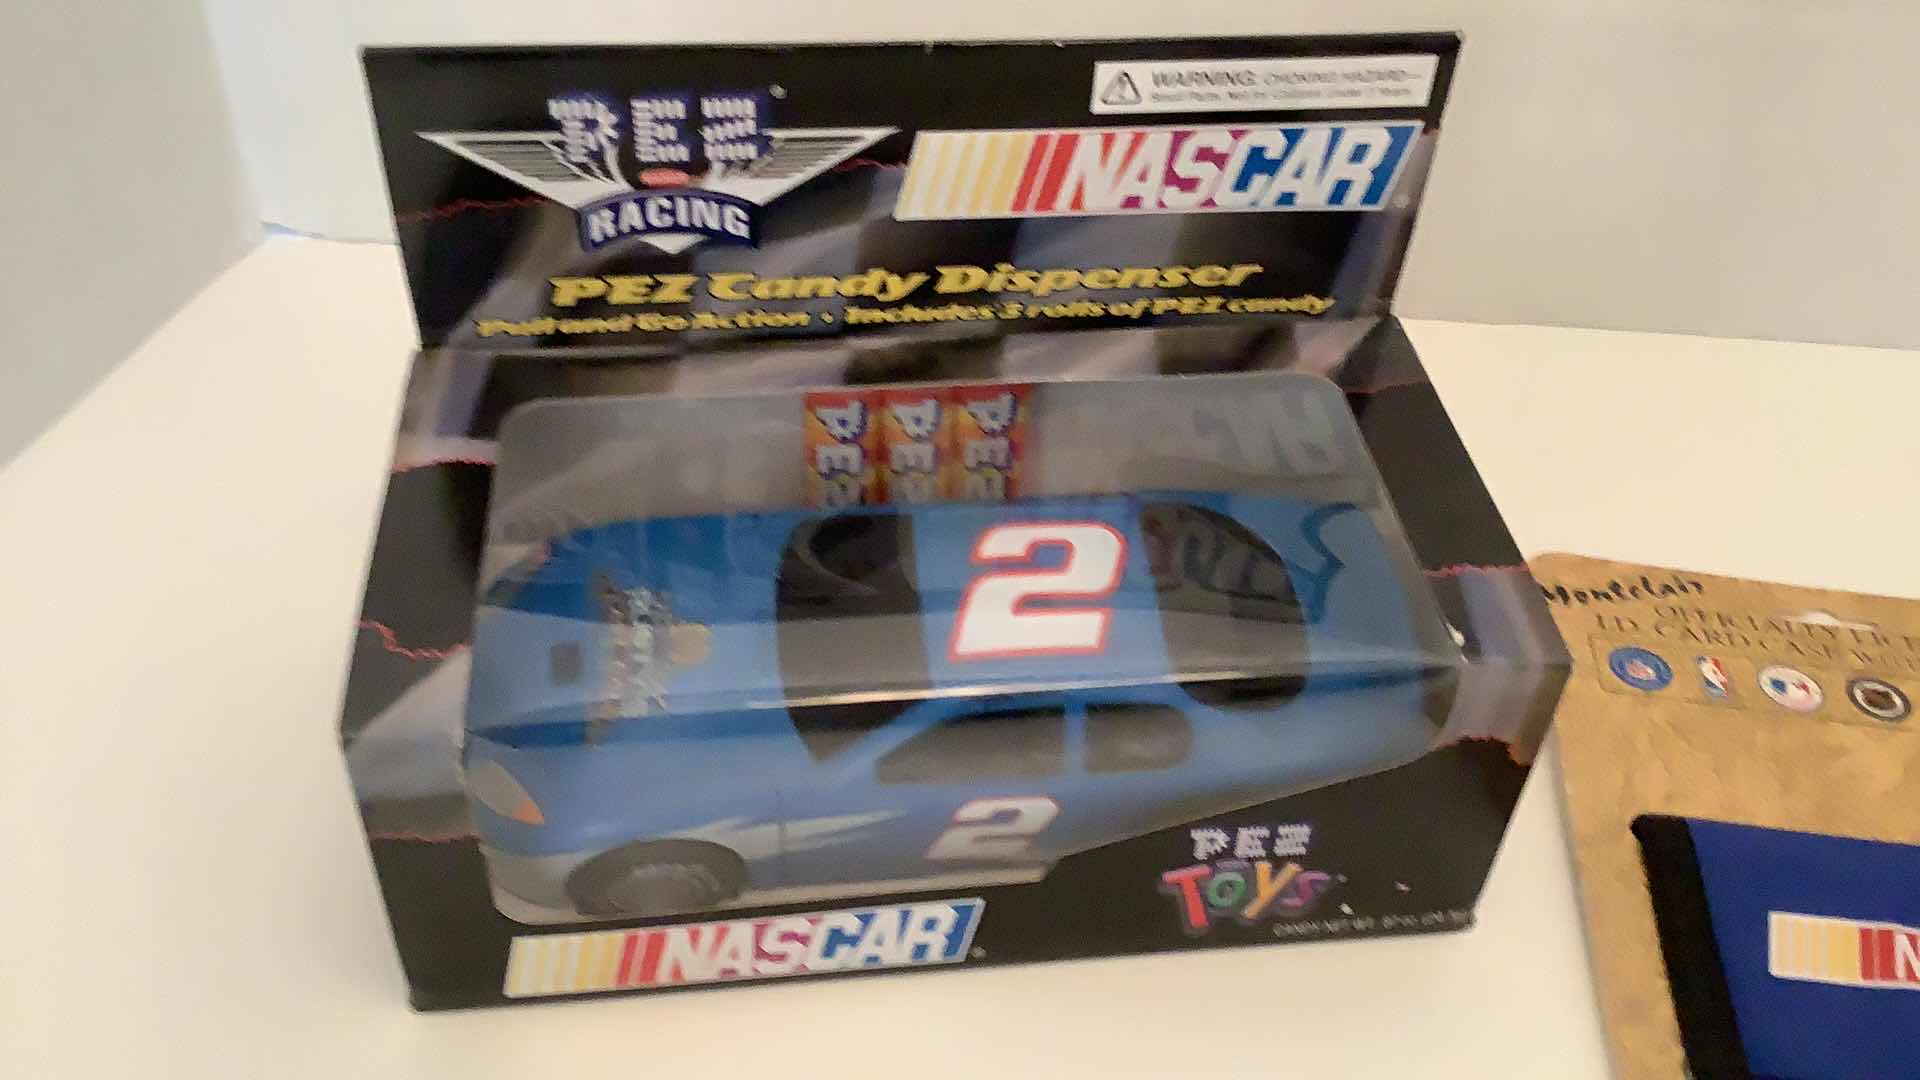 Photo 3 of NASCAR #2 PEZ CANDY DISPENSER AND CARD CASE